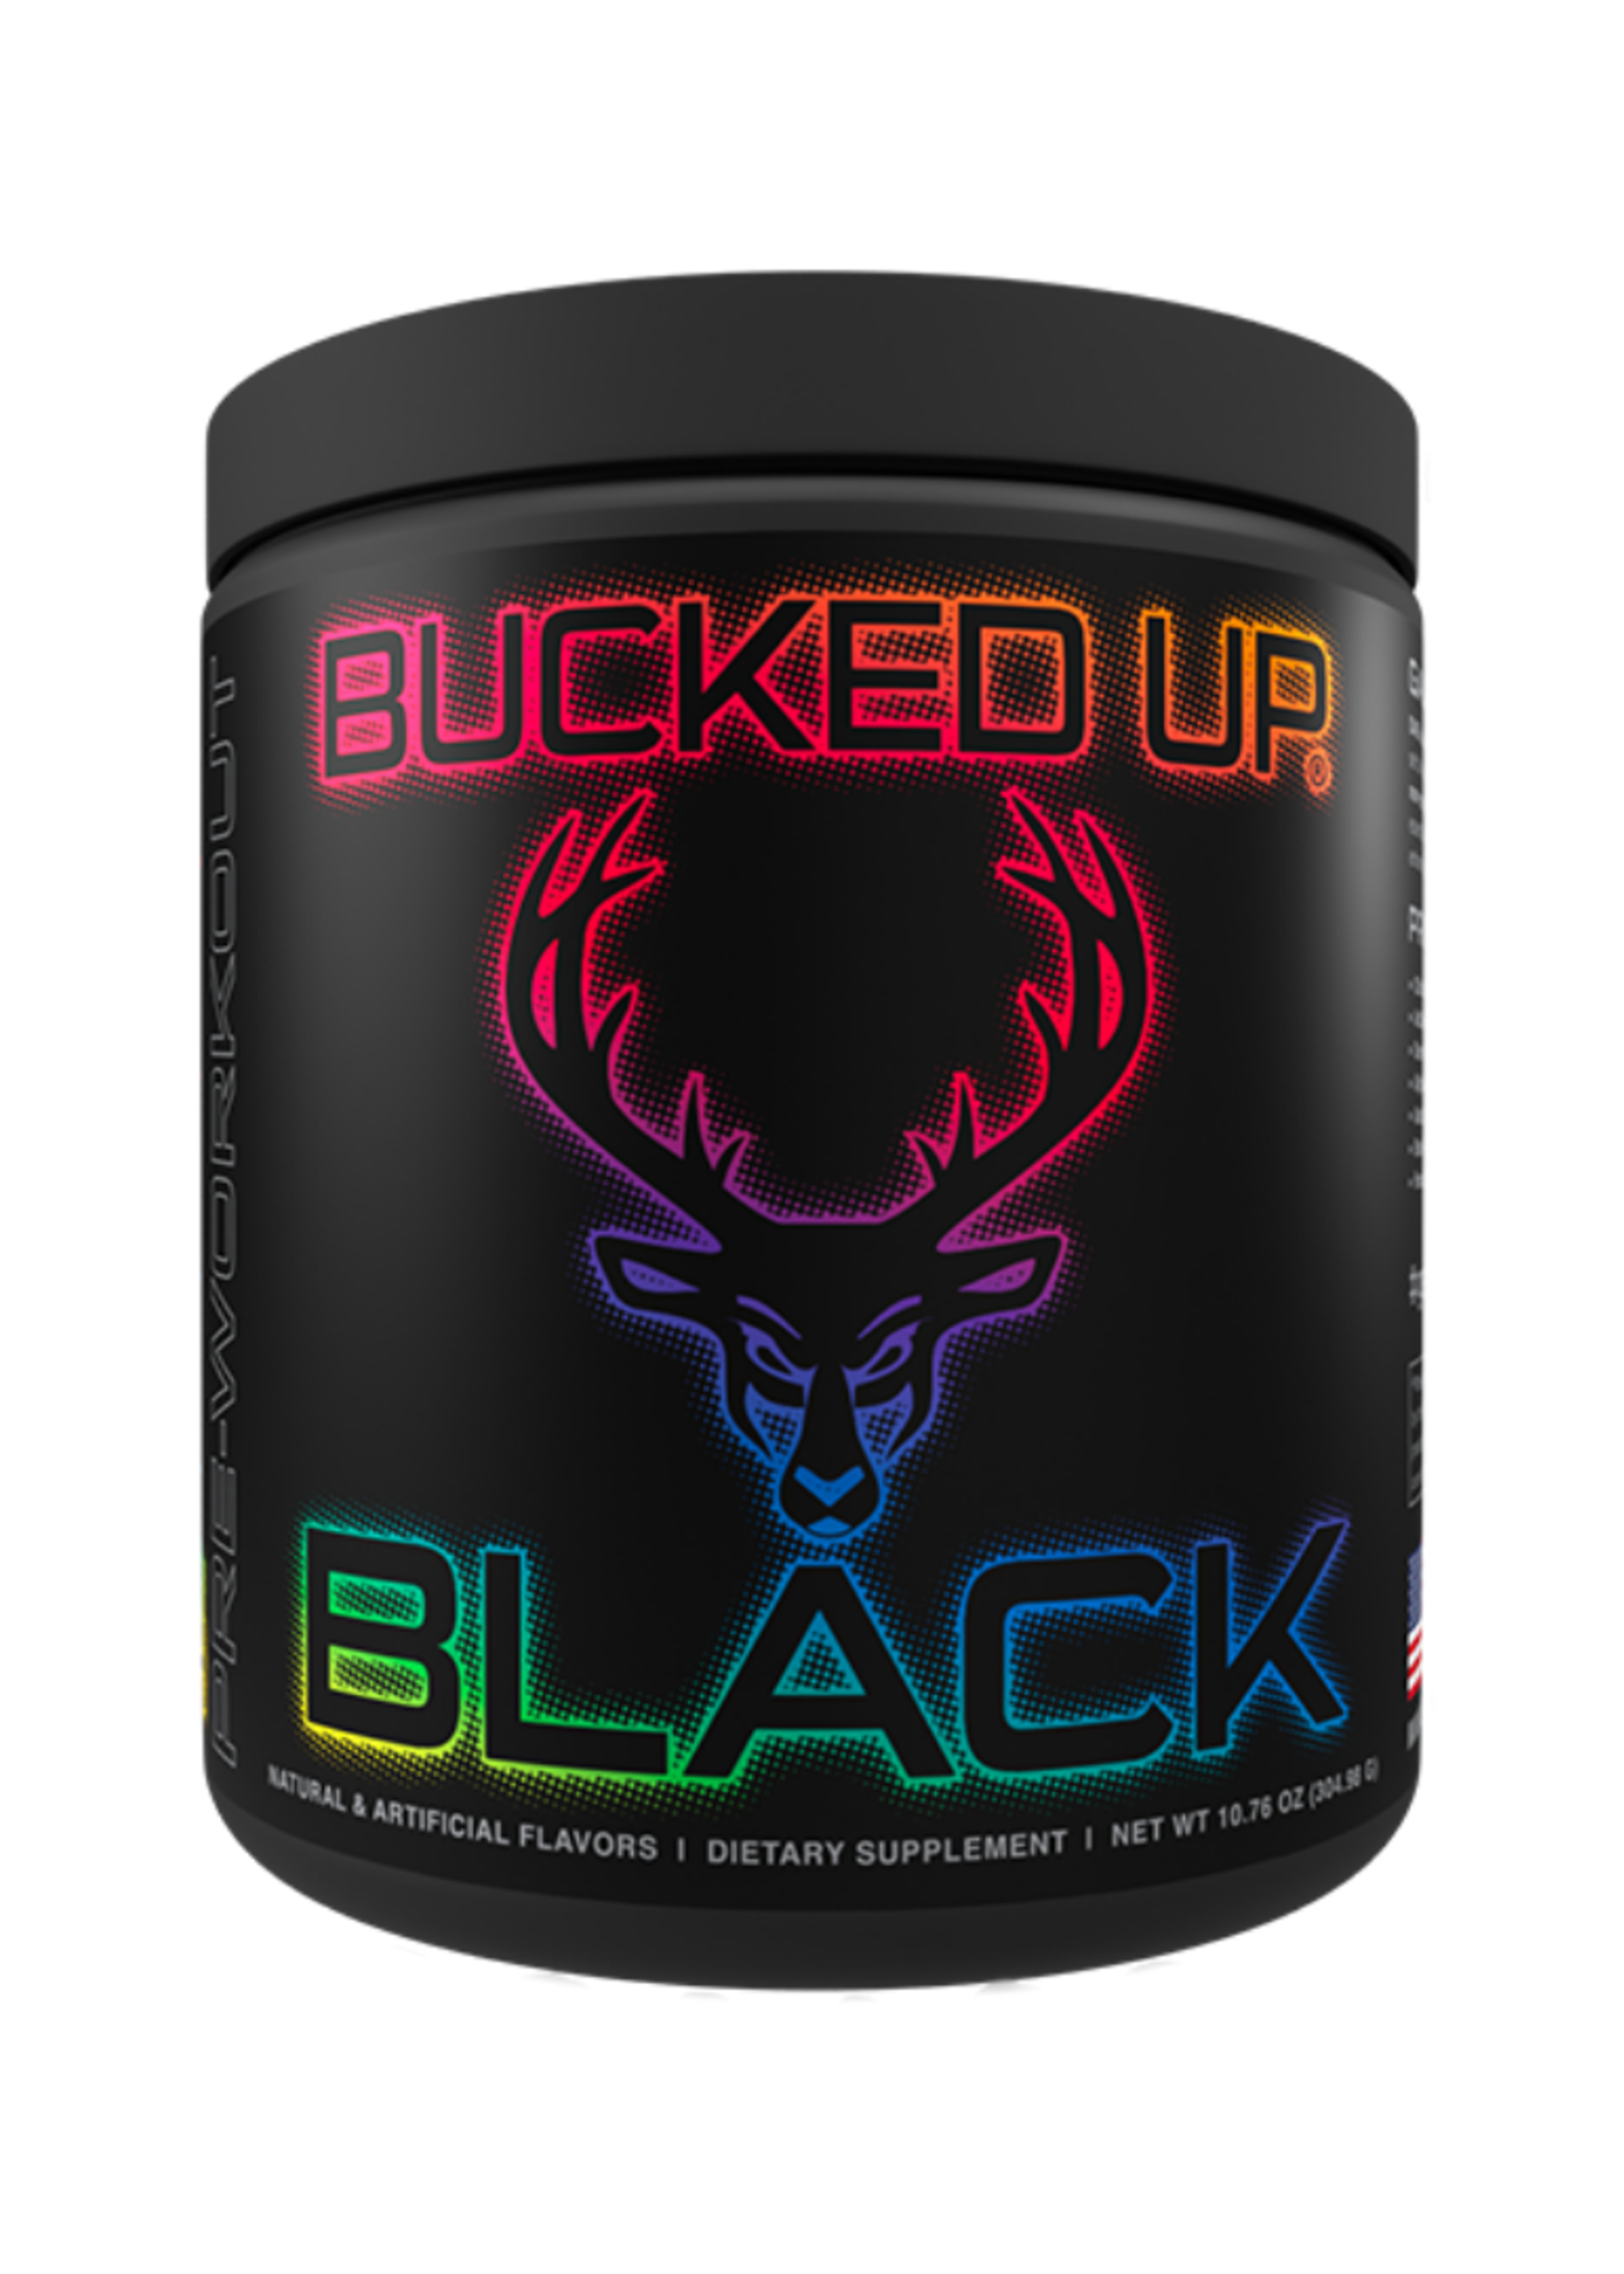 Bucked Up Bucked Up Black Pre-Workout